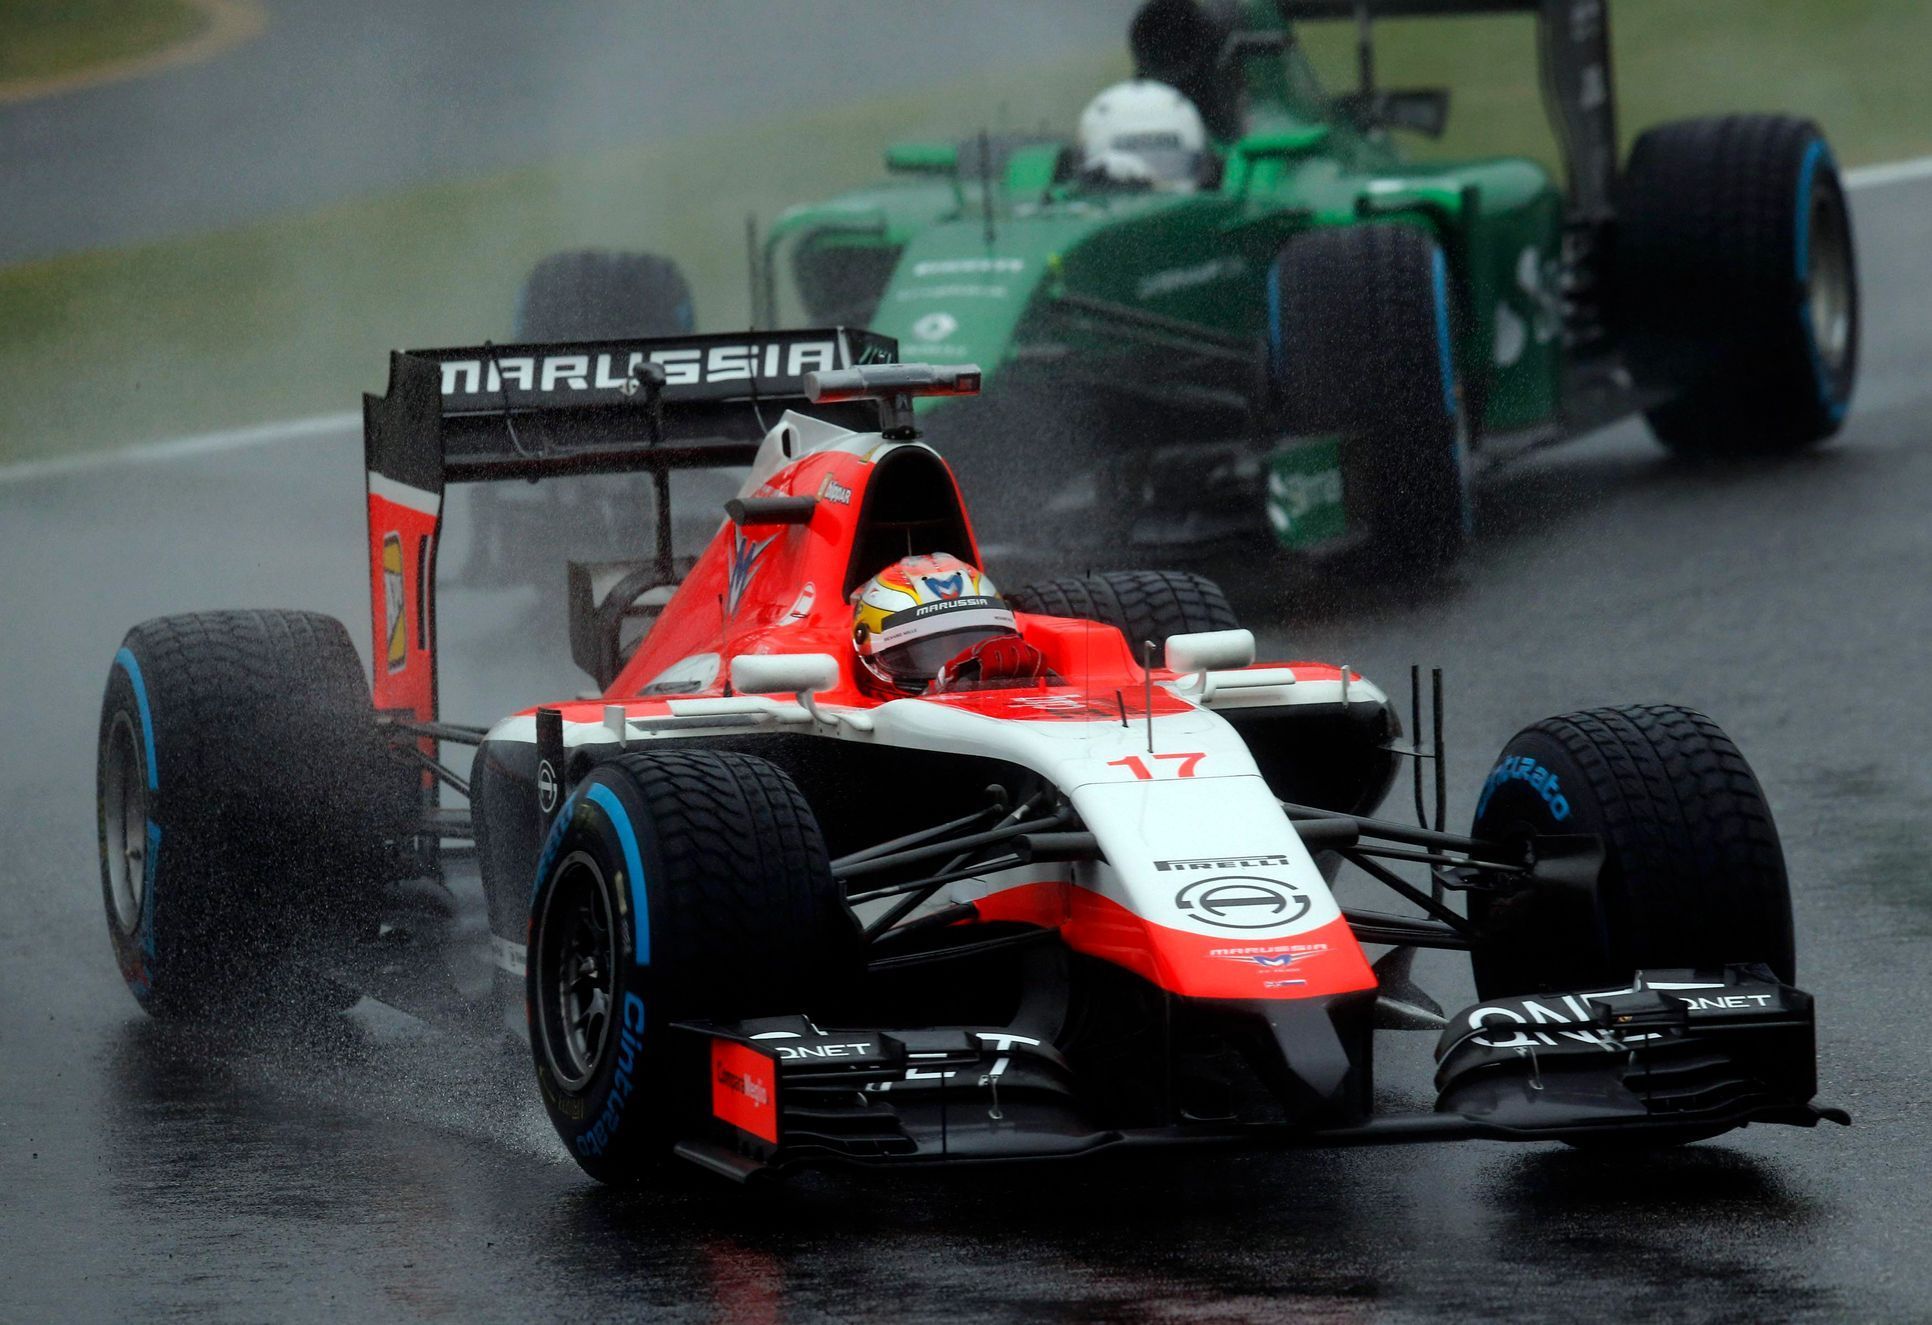 Marussia Formula One driver Bianchi of France drives in front of Caterham Formula One driver Kobayashi of Japan during the Japanese F1 Grand Prix at the Suzuka Circuit